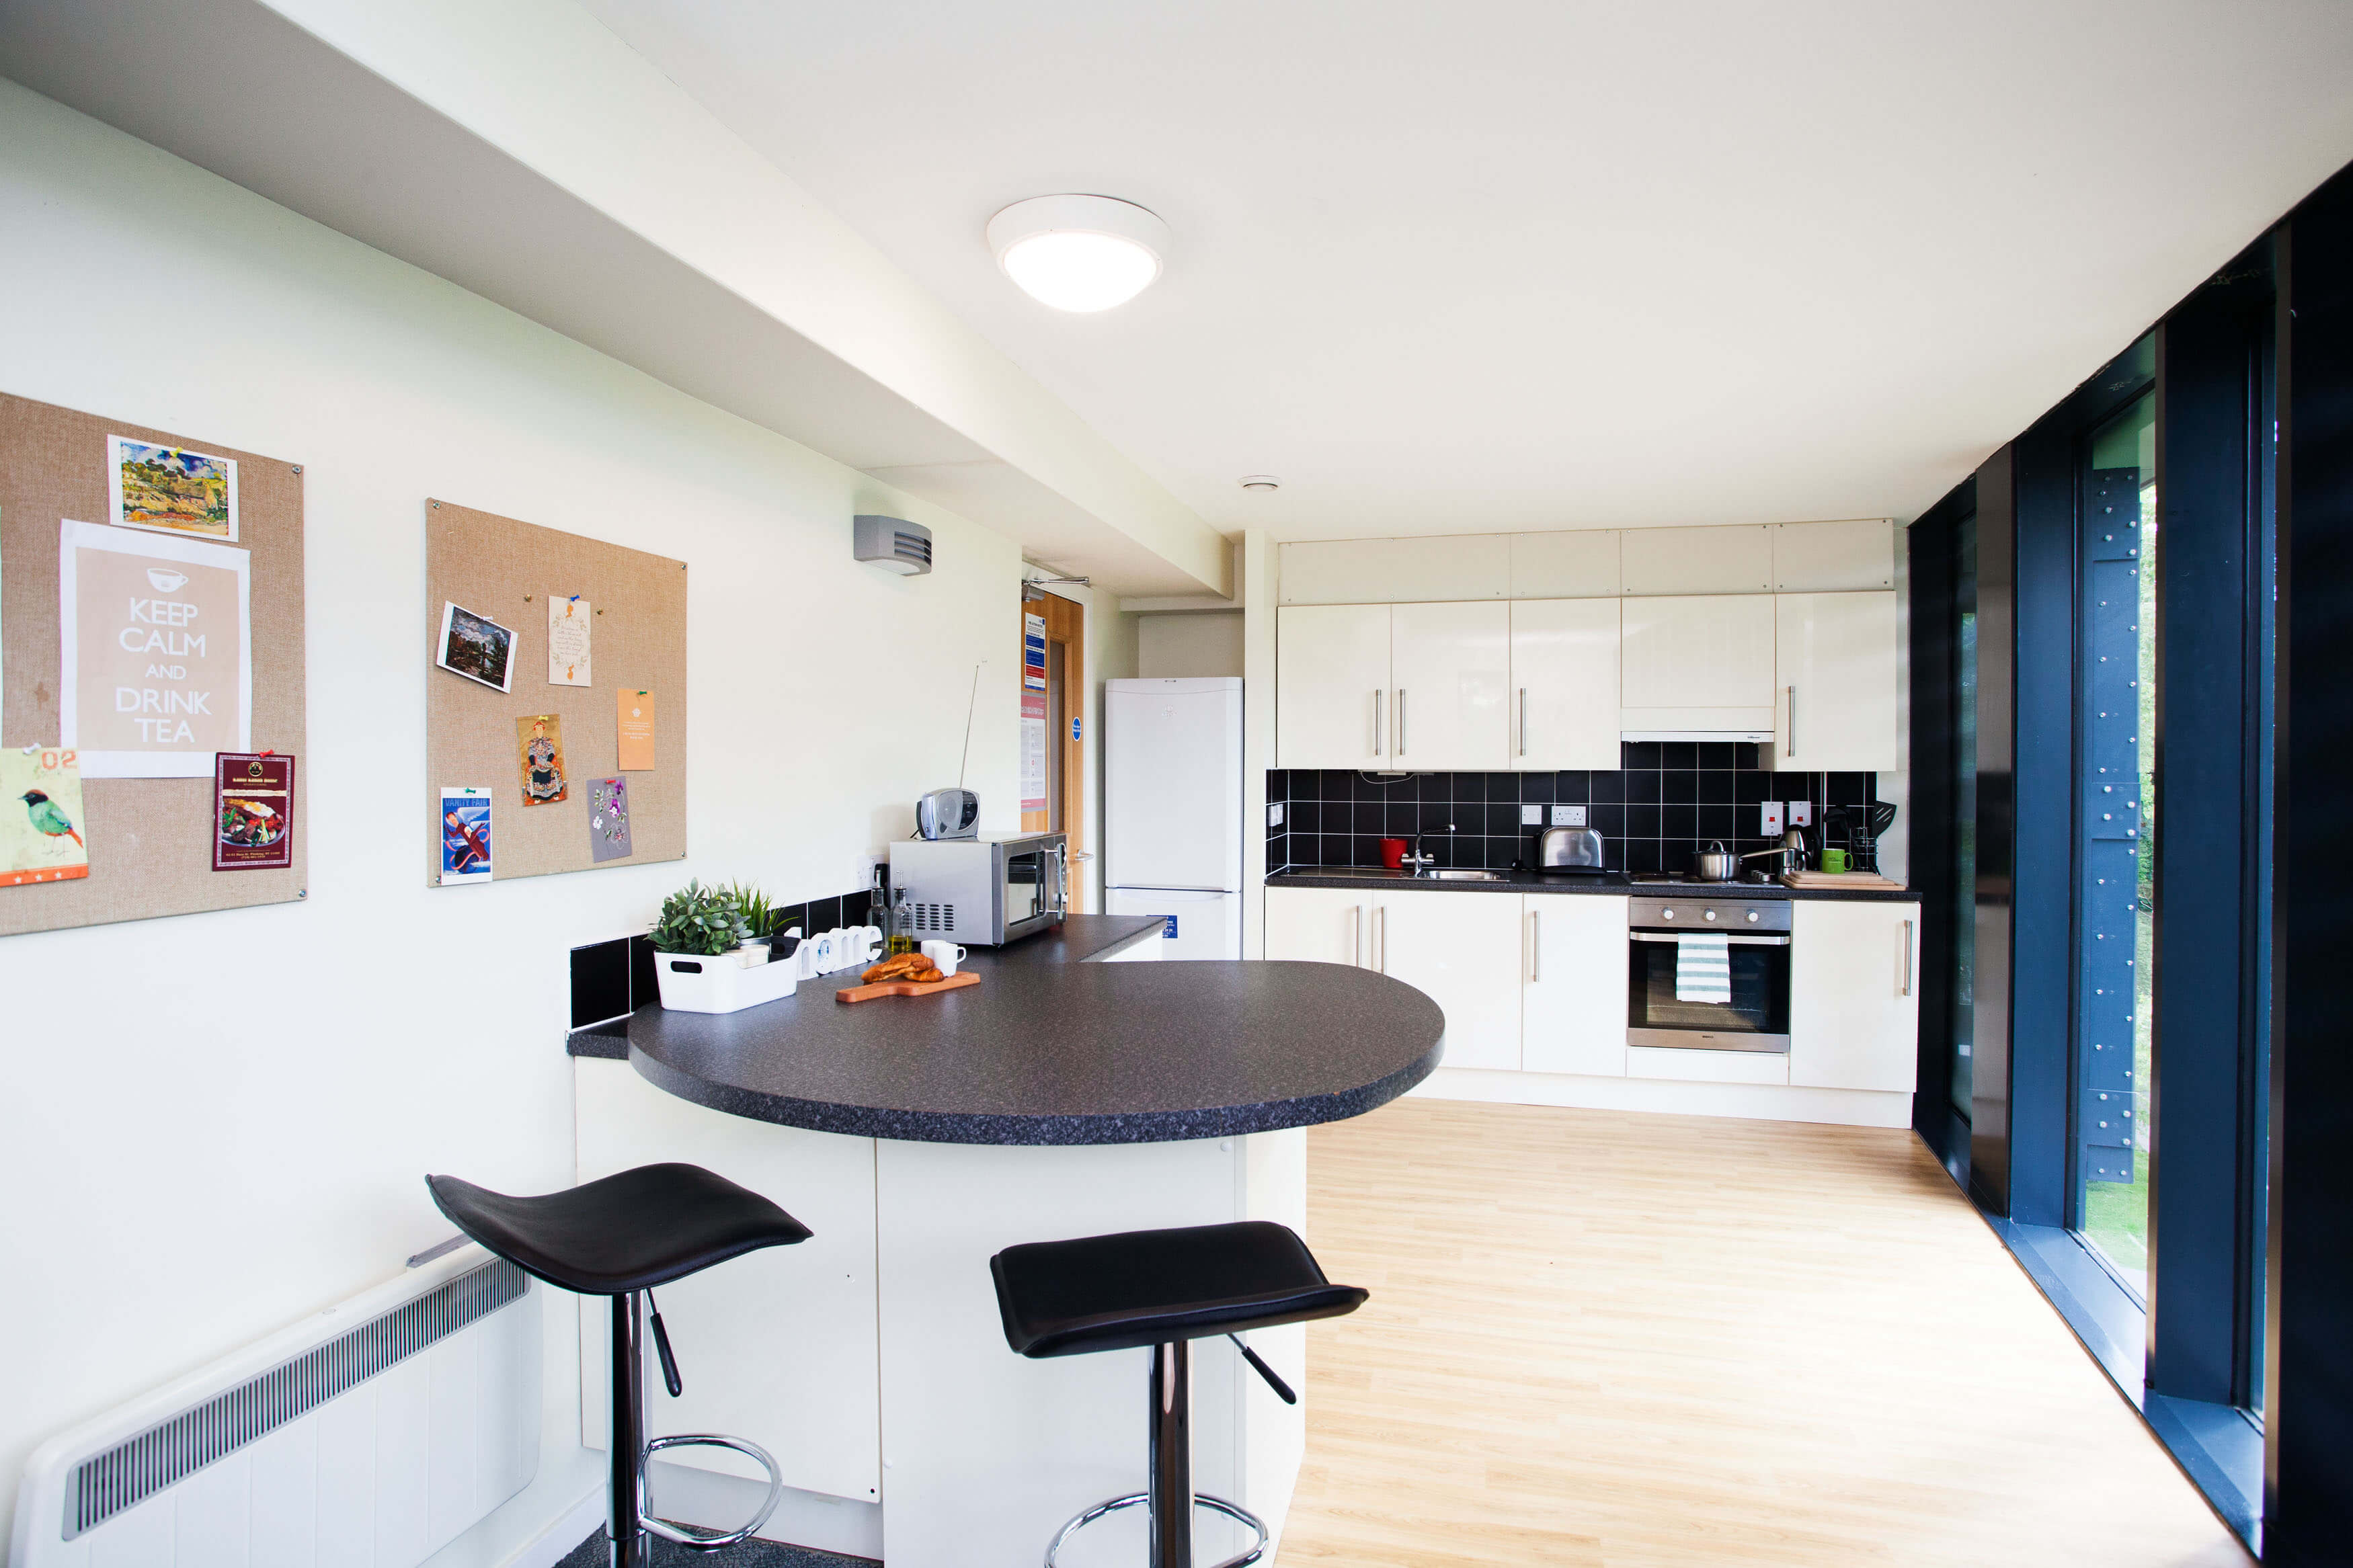 Shared kitchen area at Chalmers Street